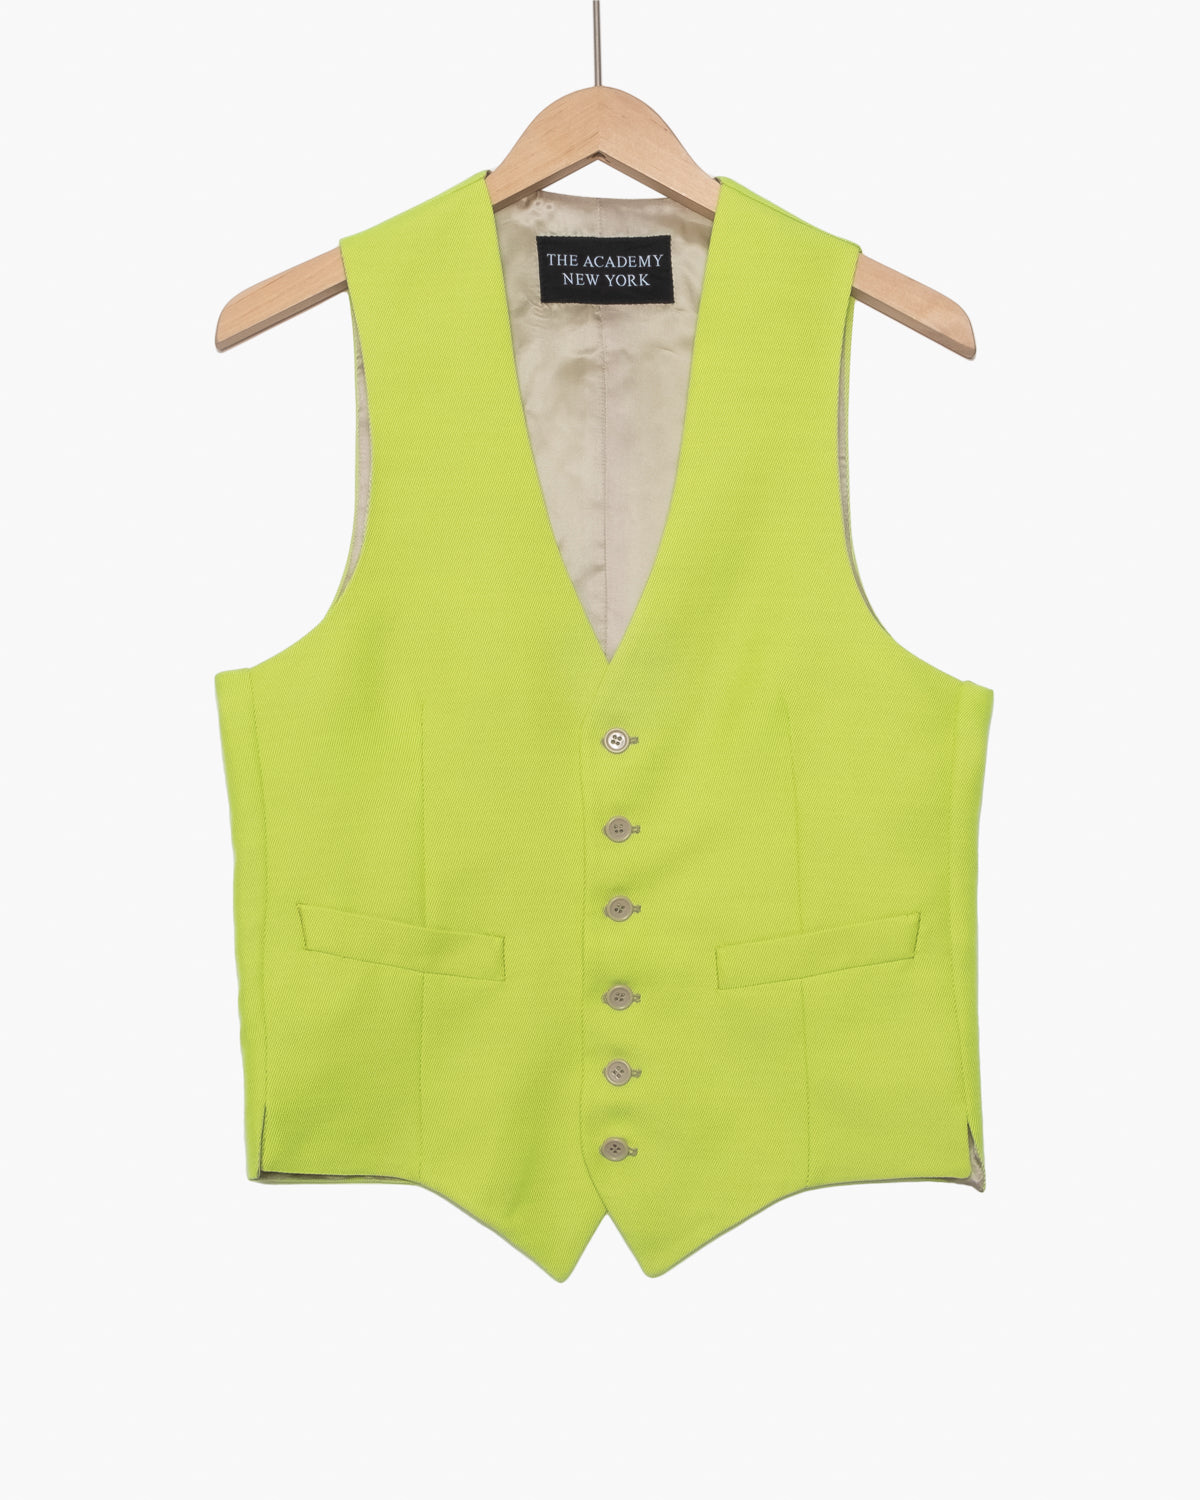 Vest : Archive Spring / Sumer 22 collection sample